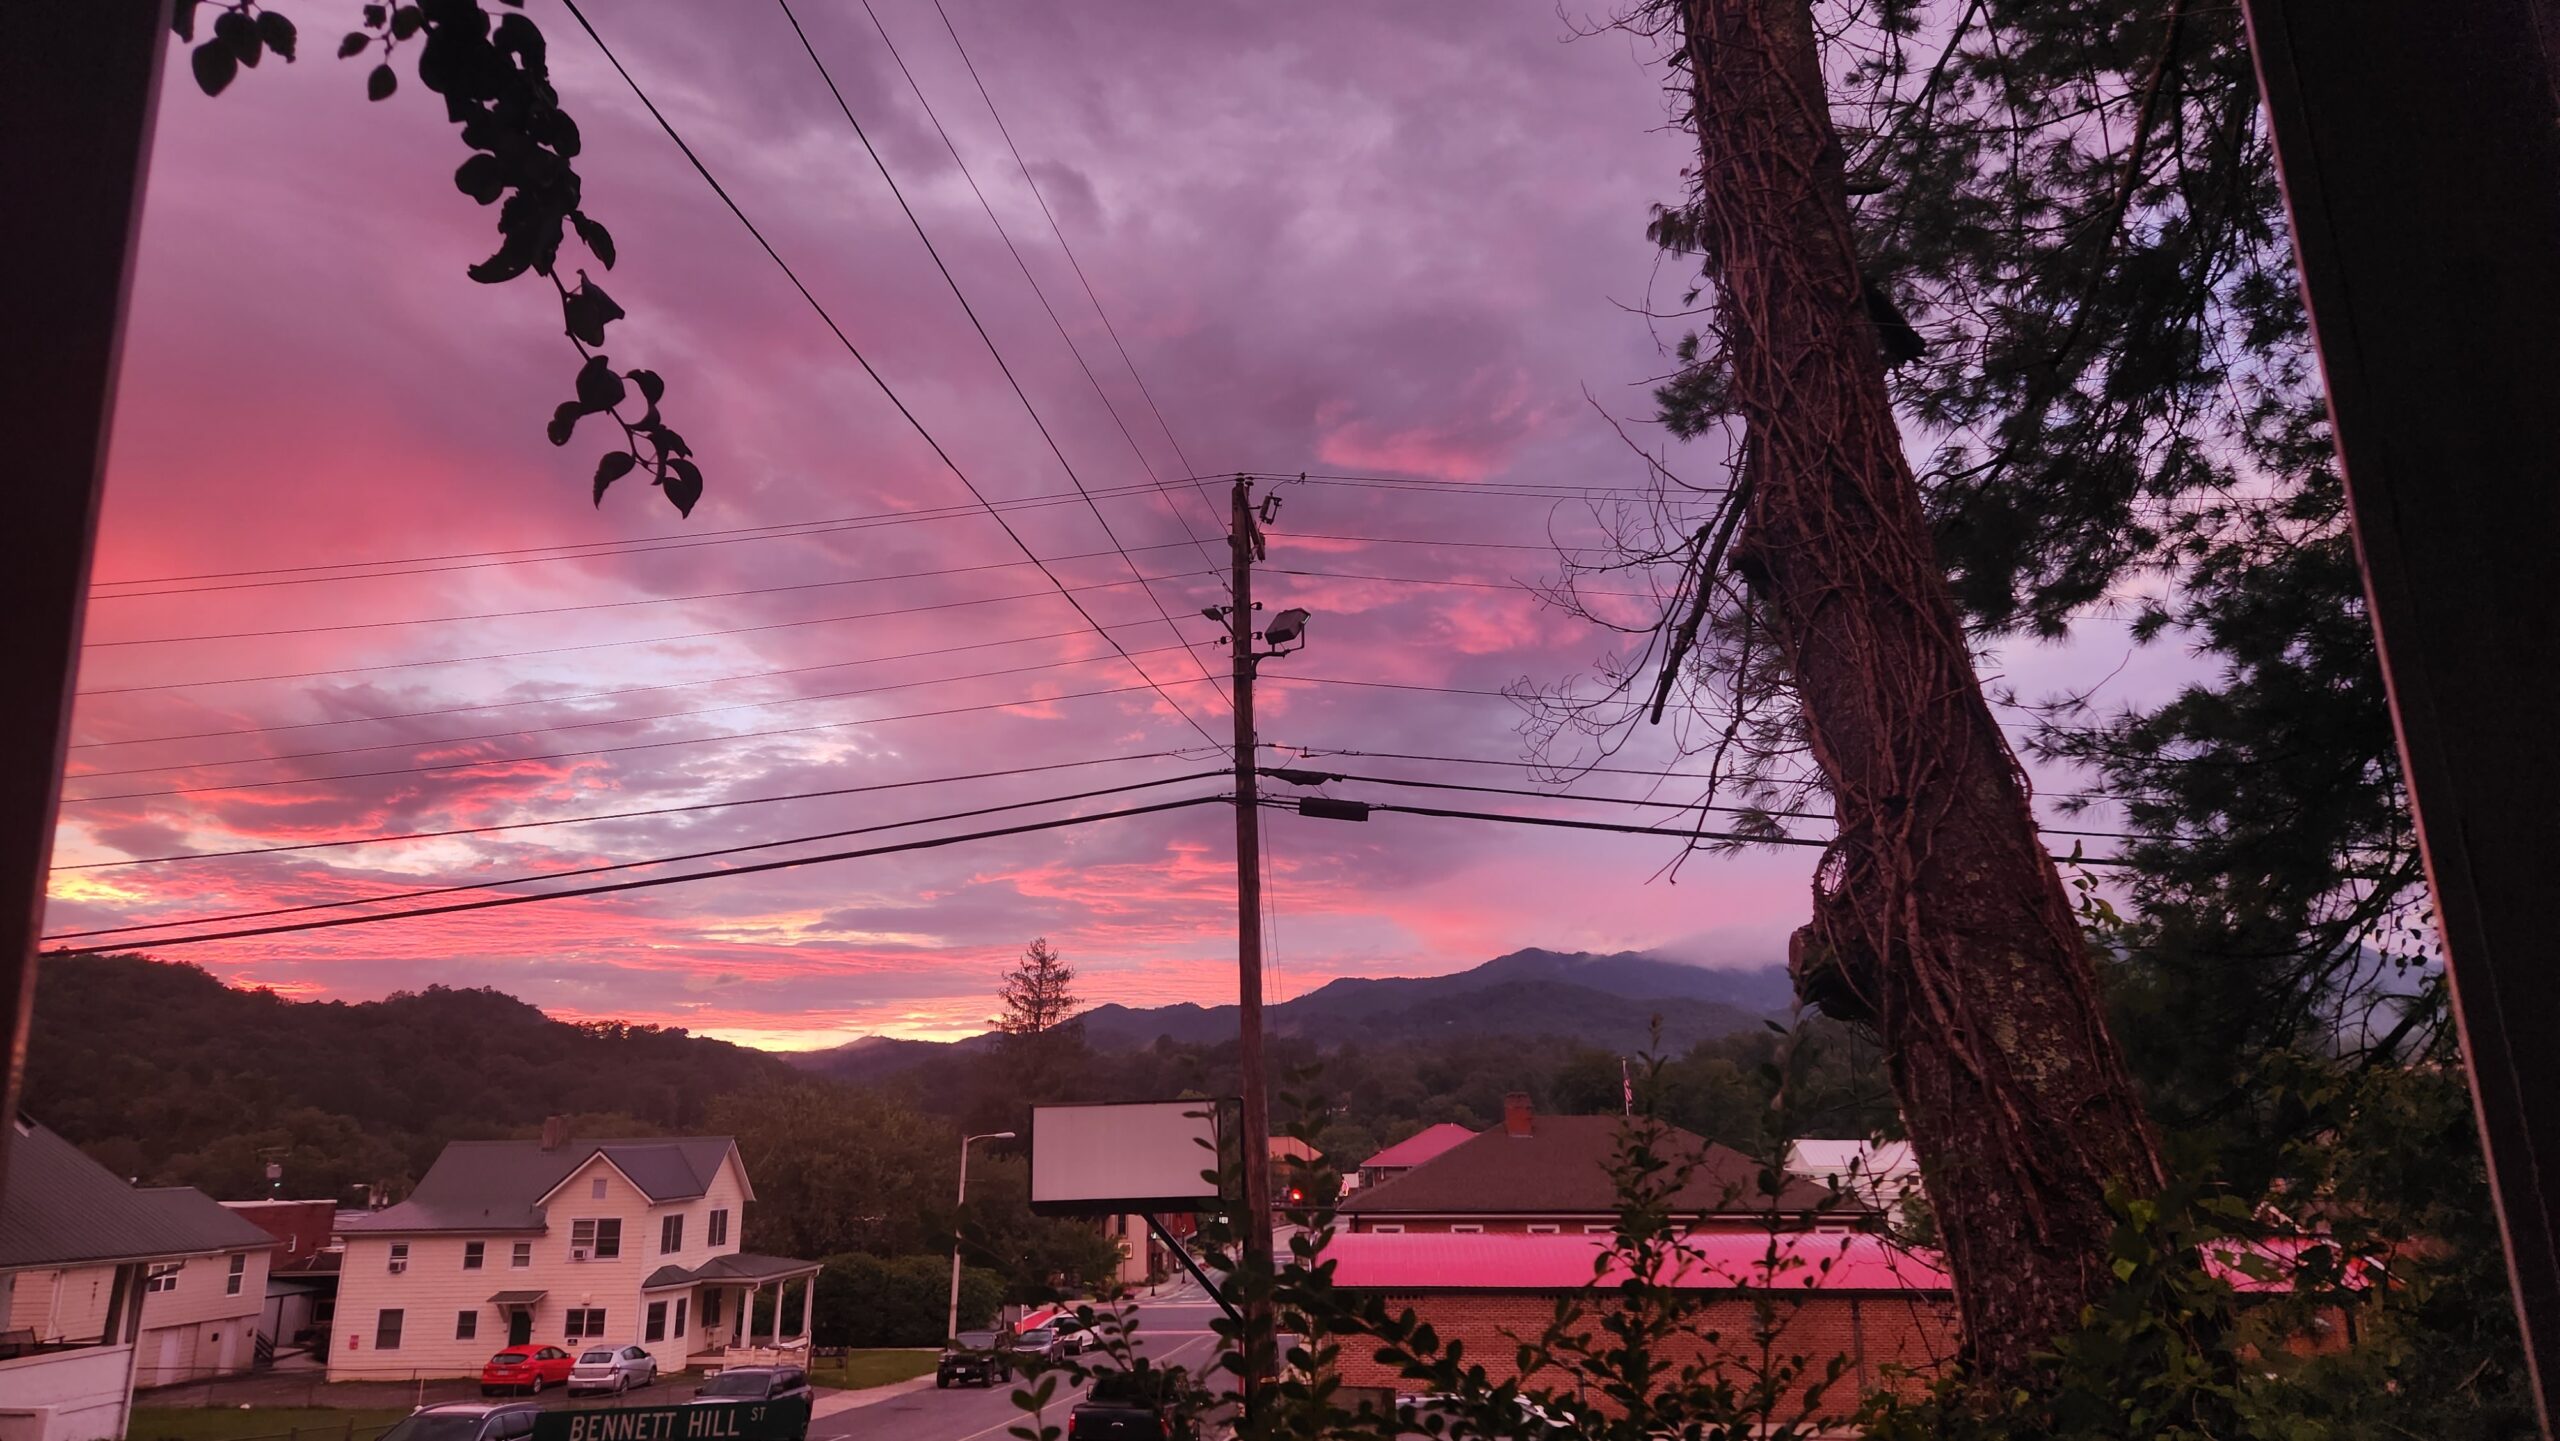 A sunset photo, with clouds illuminated pink, houses and mountains bathed in the light.